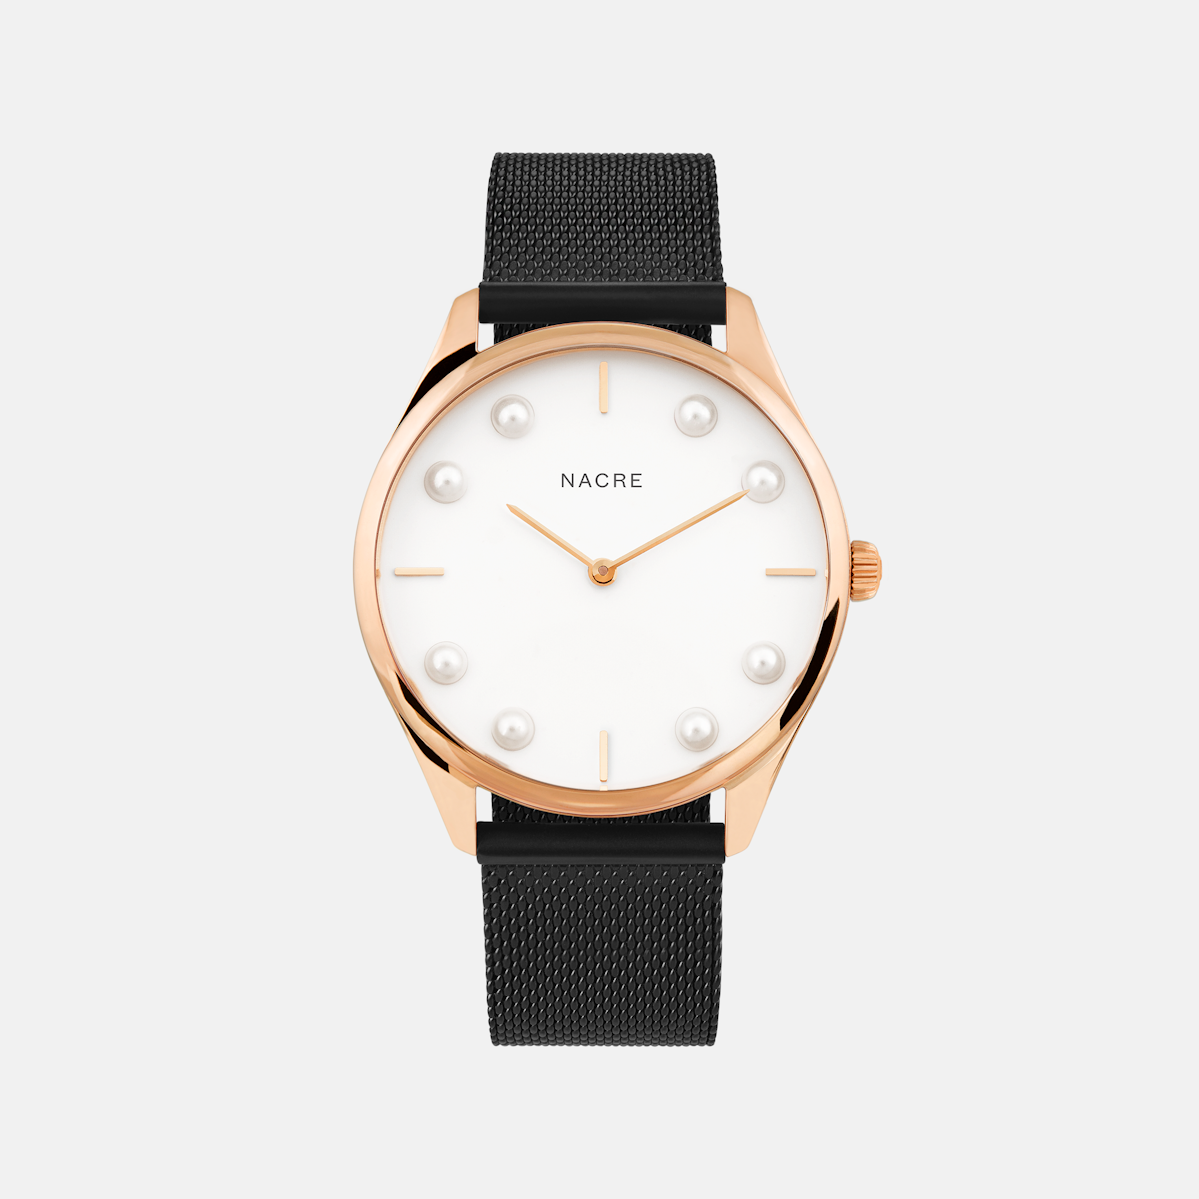 Lune 8 - Rose Gold and White - Black Leather